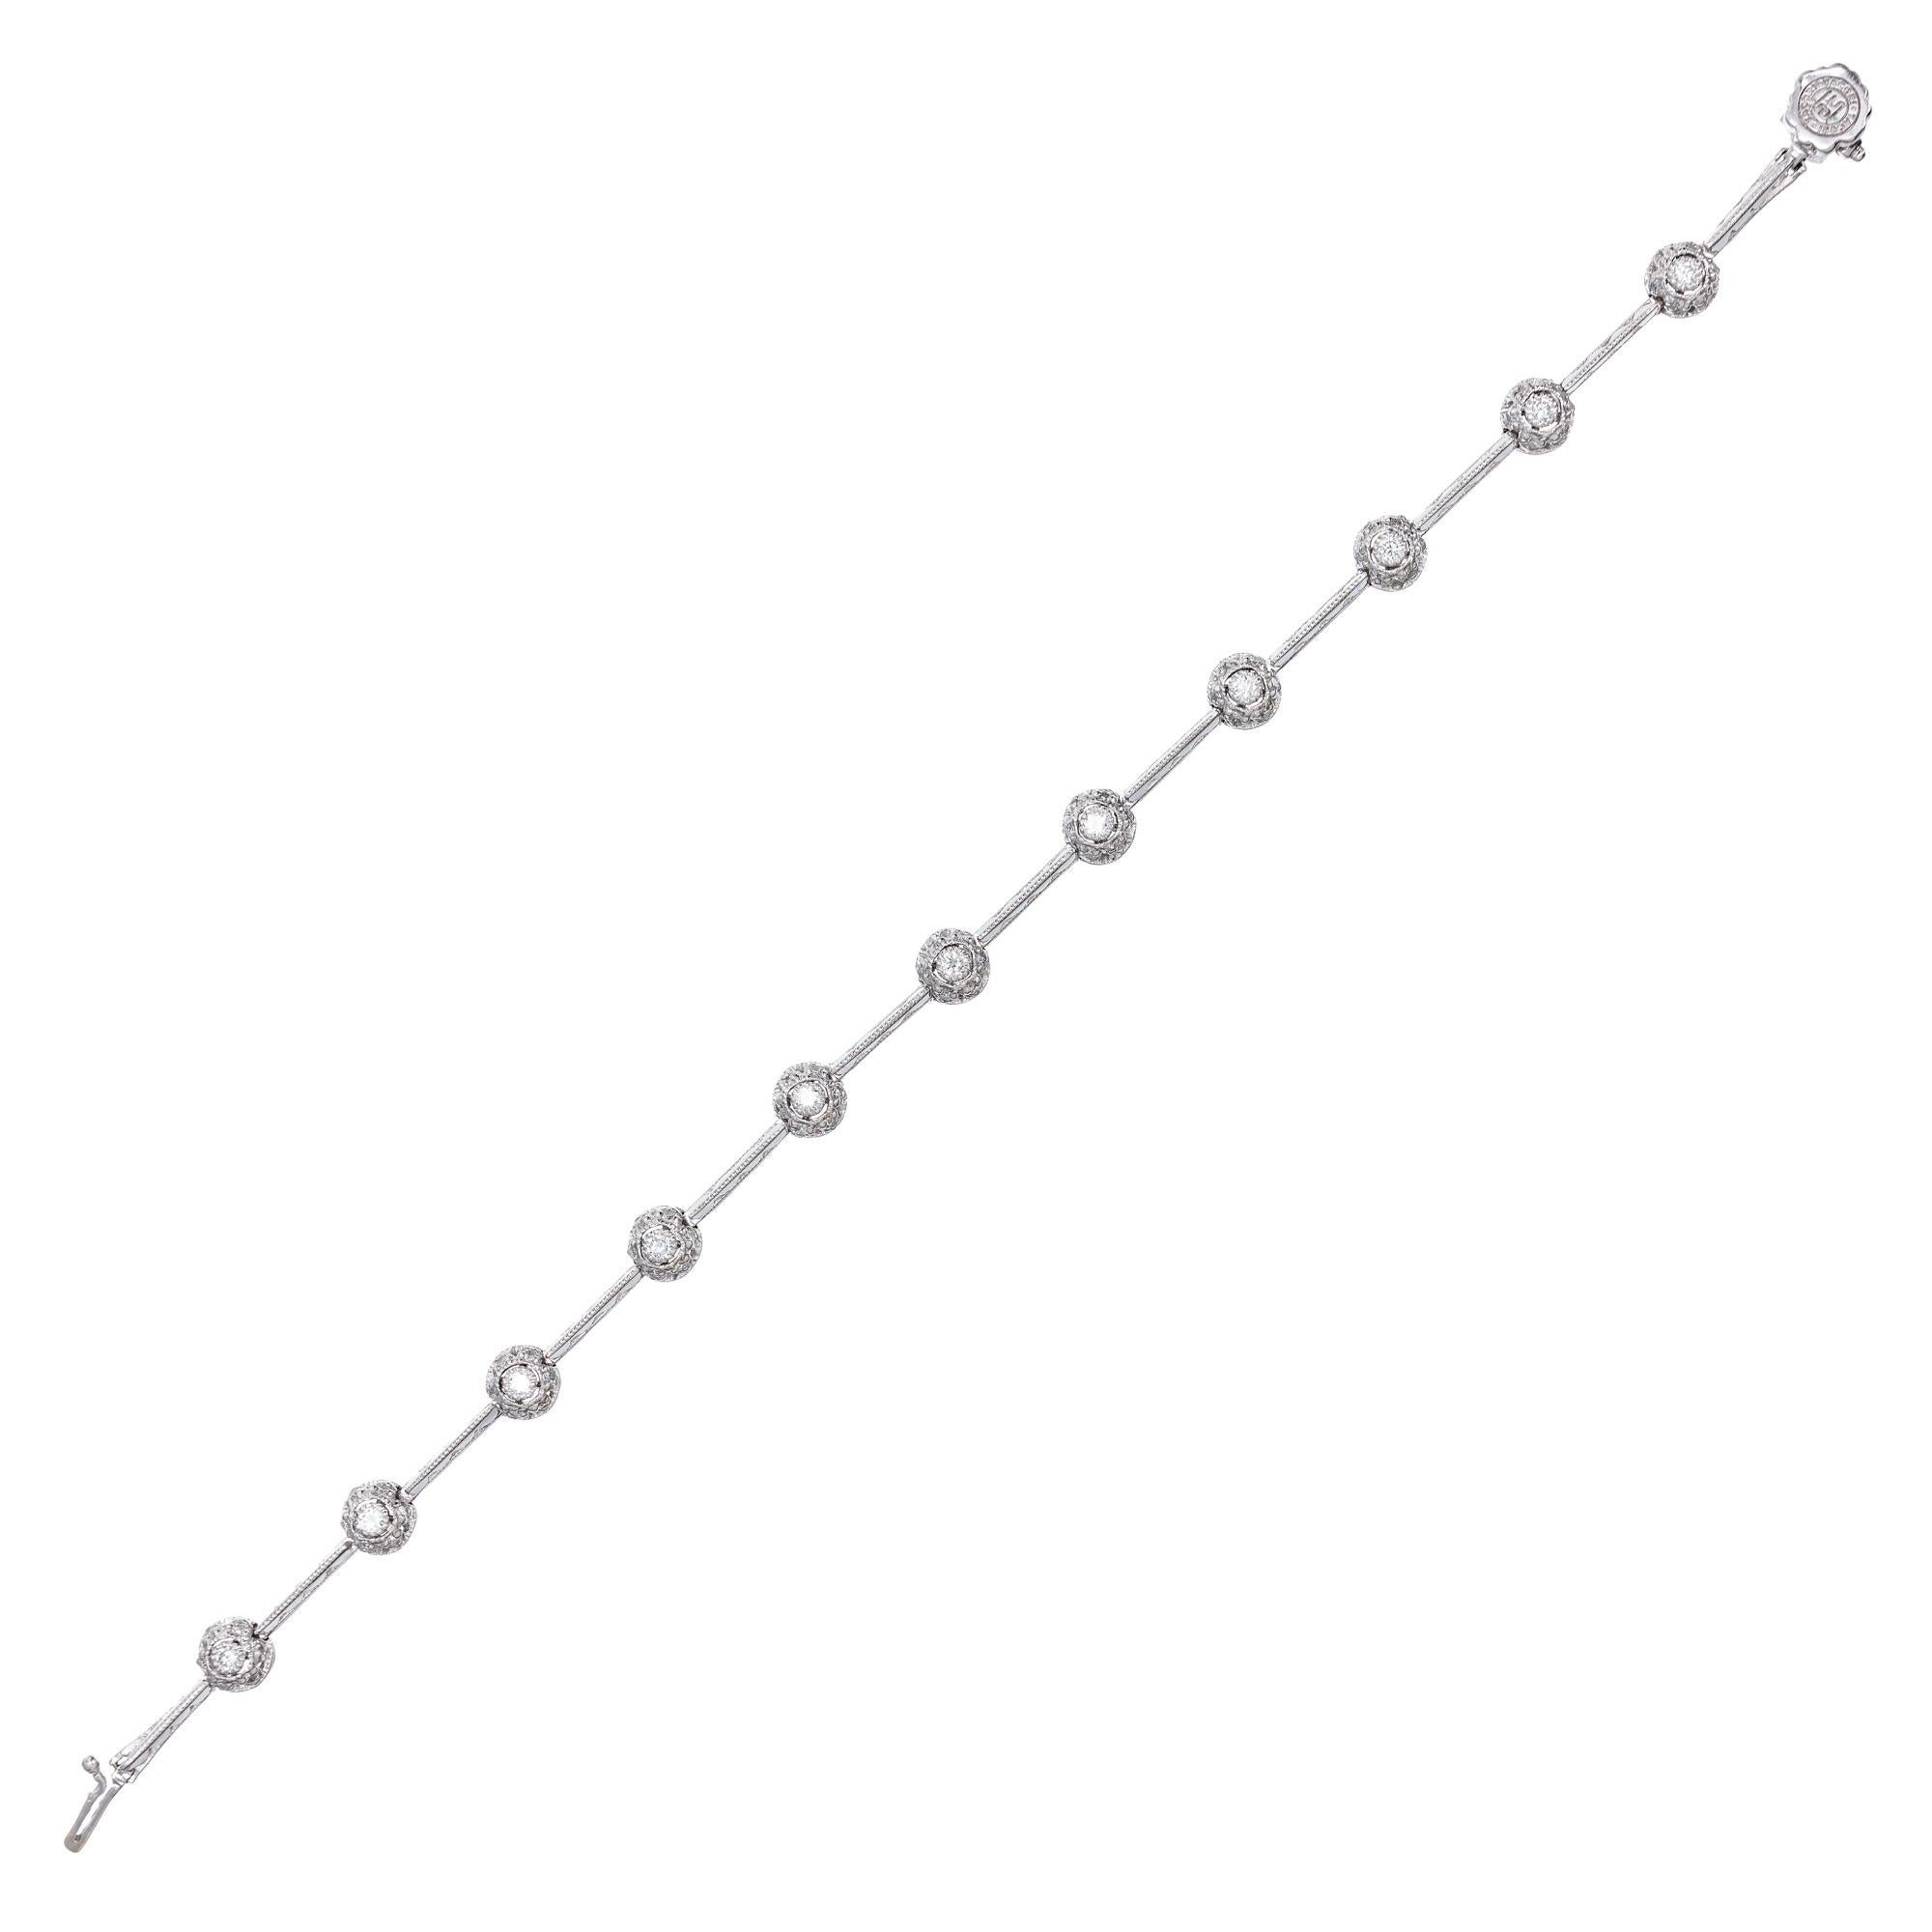 Tacori diamond bracelet. 11 round cut diamonds with round diamond halos set in platinum. Classic Tacori bead setting and cut out work. 7 inches in length. 

77 round diamonds, approx. total weight .90cts, G, VS
Platinum
Tested: Platinum
17.7